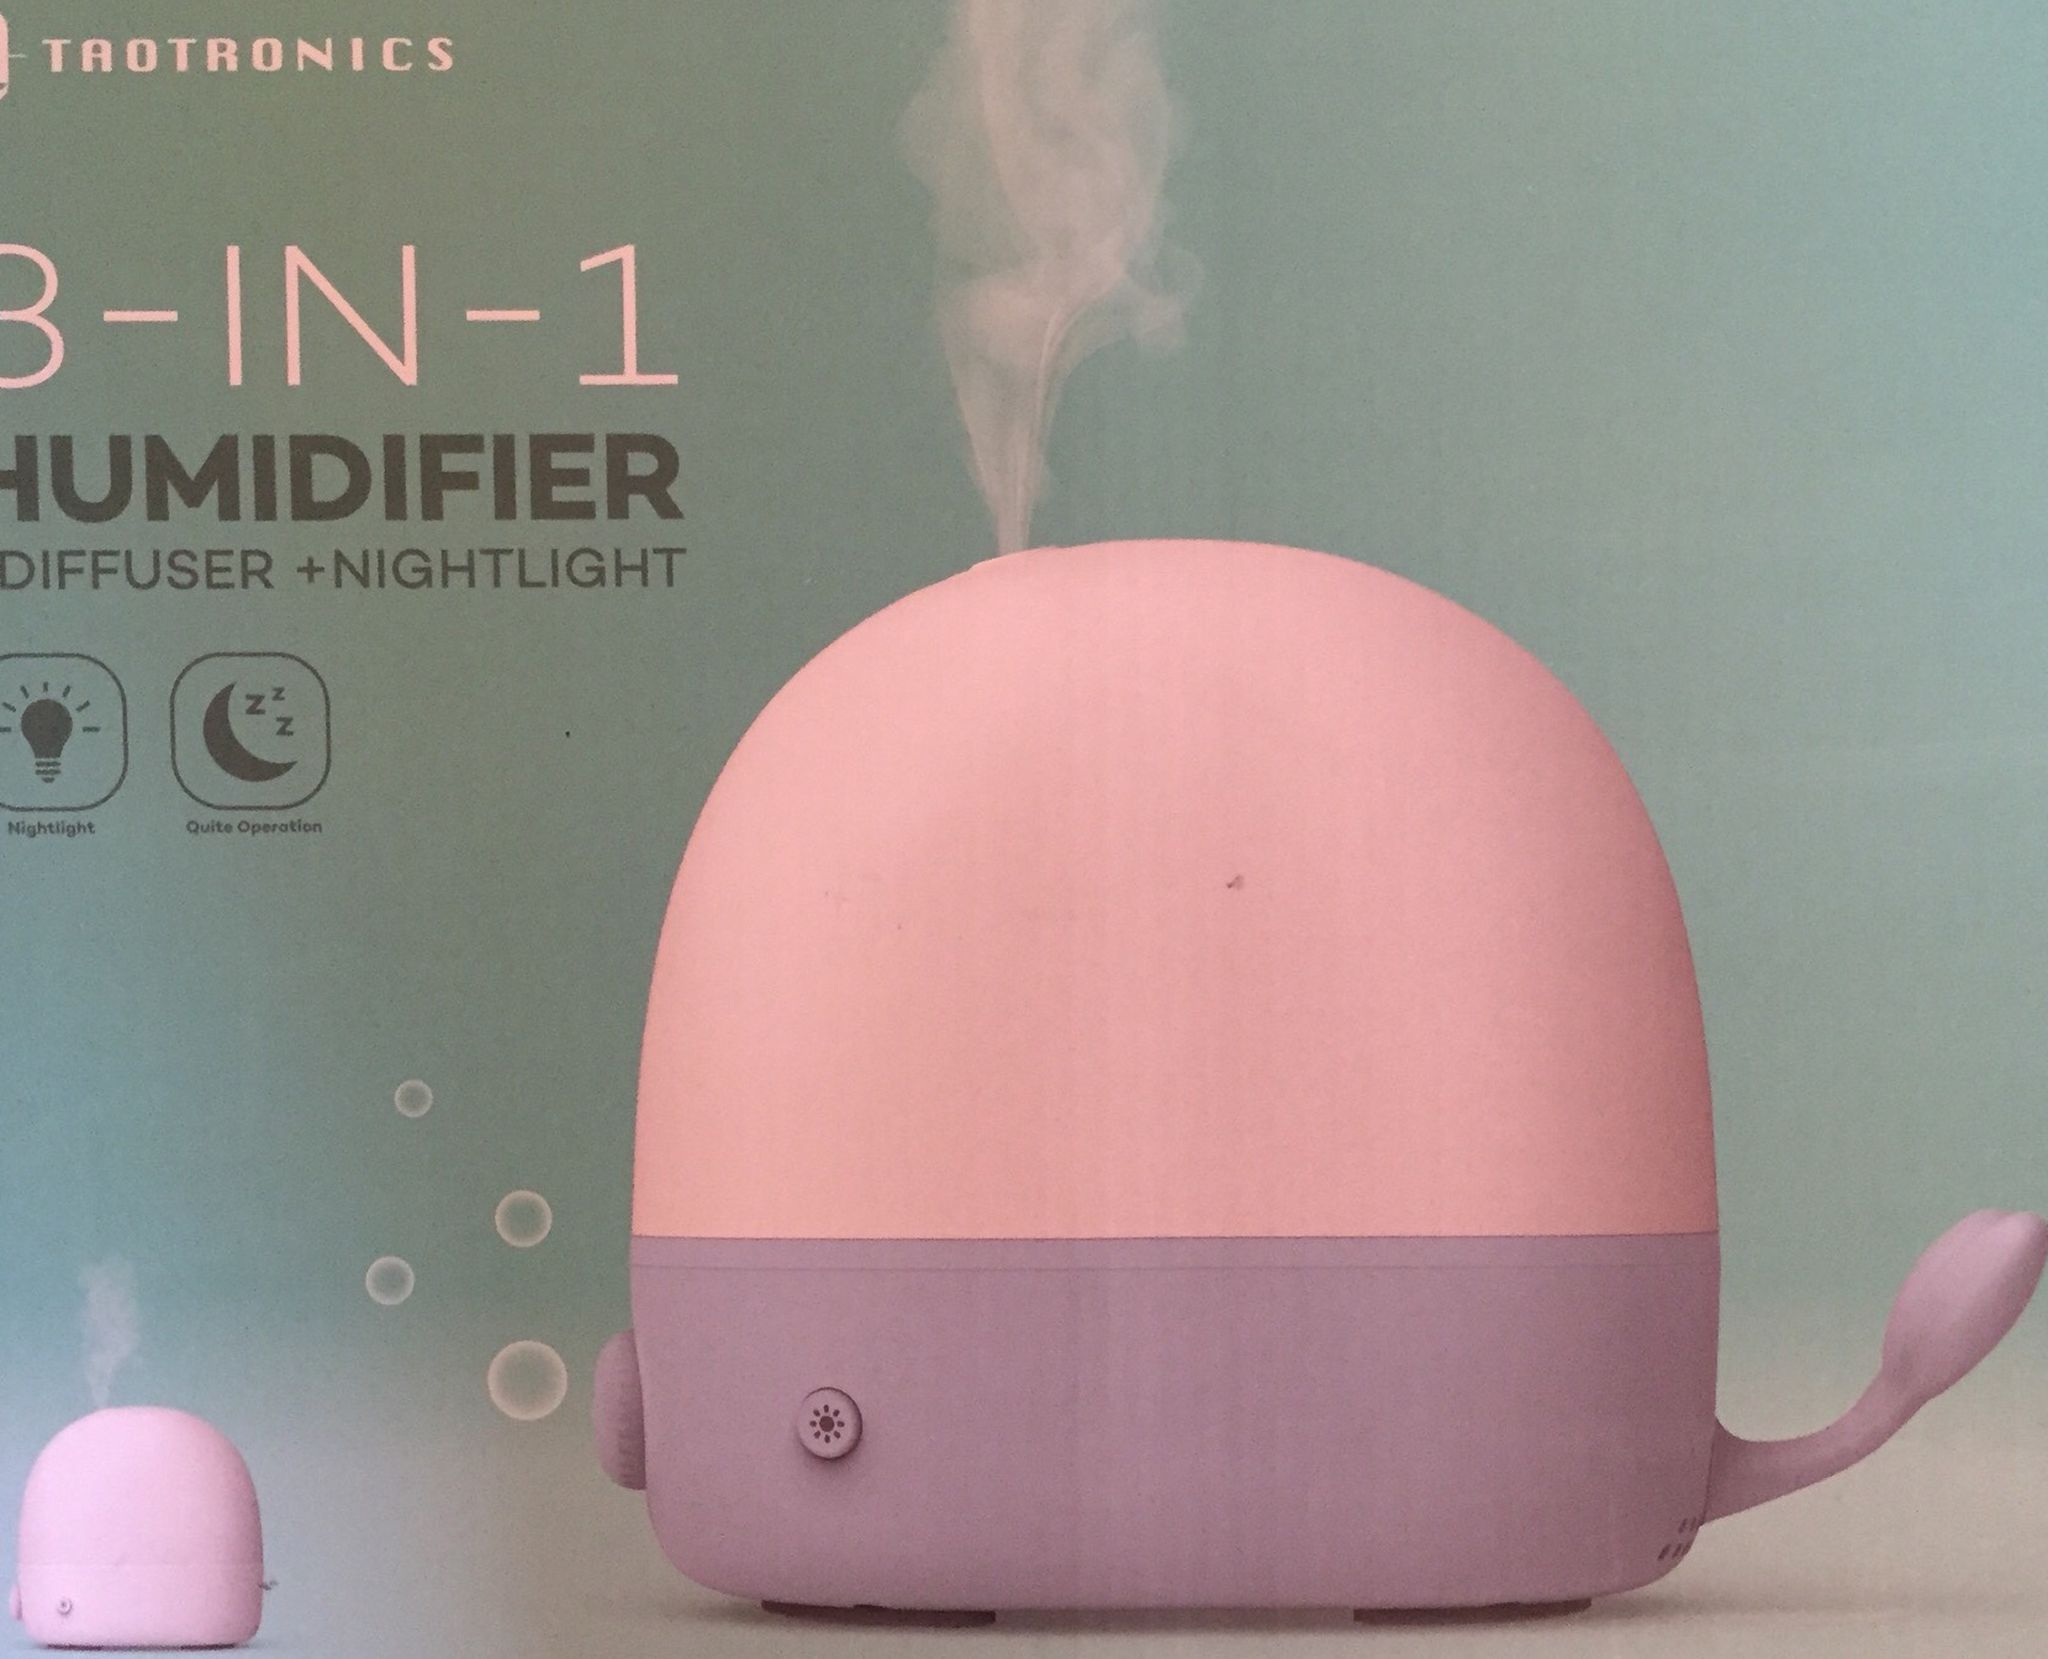 Adorable 3-IN-1 Premium Humidifier - Brand New